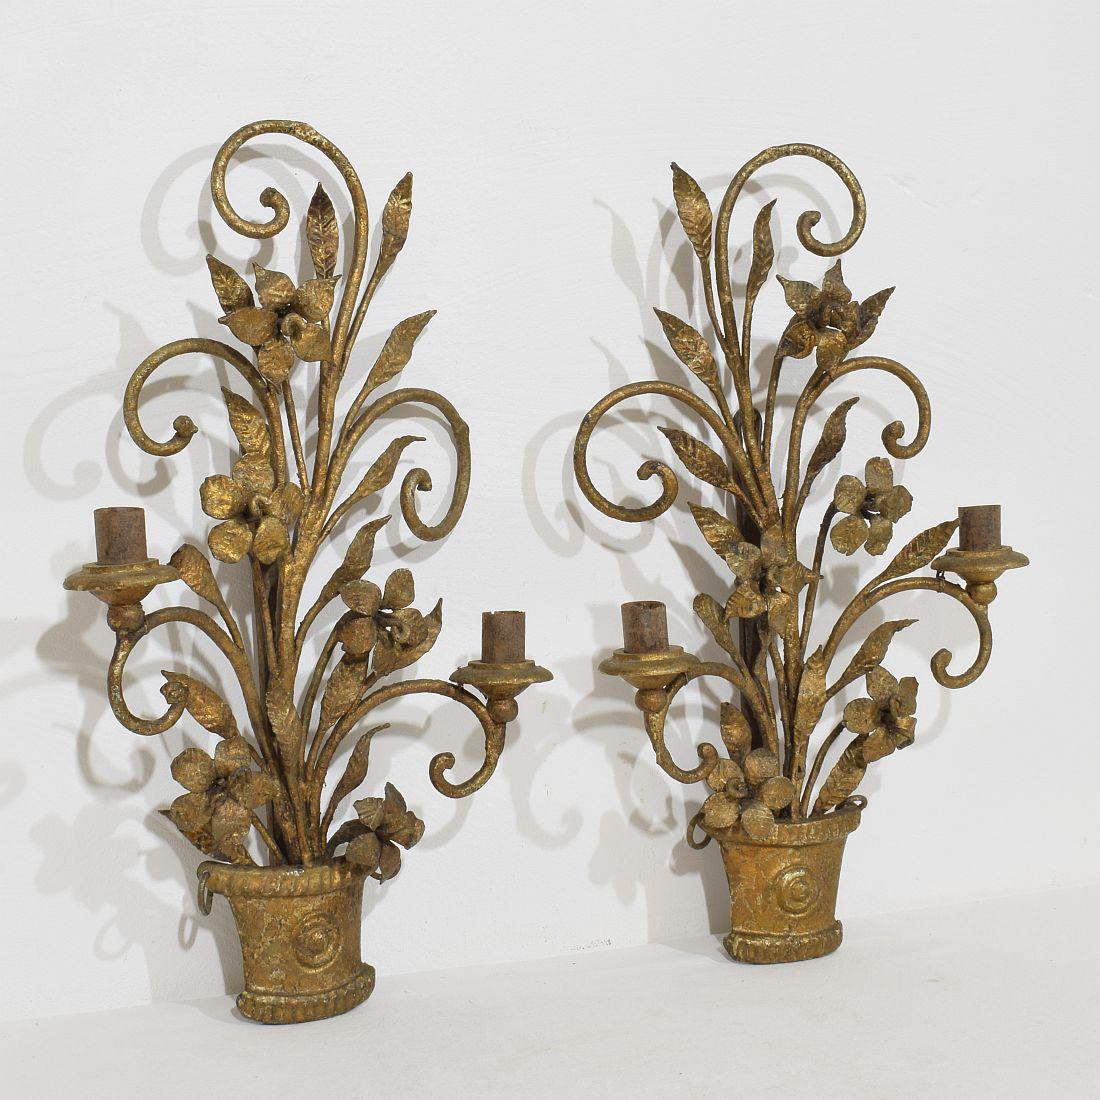 20th Century Pair Early 20th century French Hand Forged Iron Wall Candleholders / Sconces For Sale